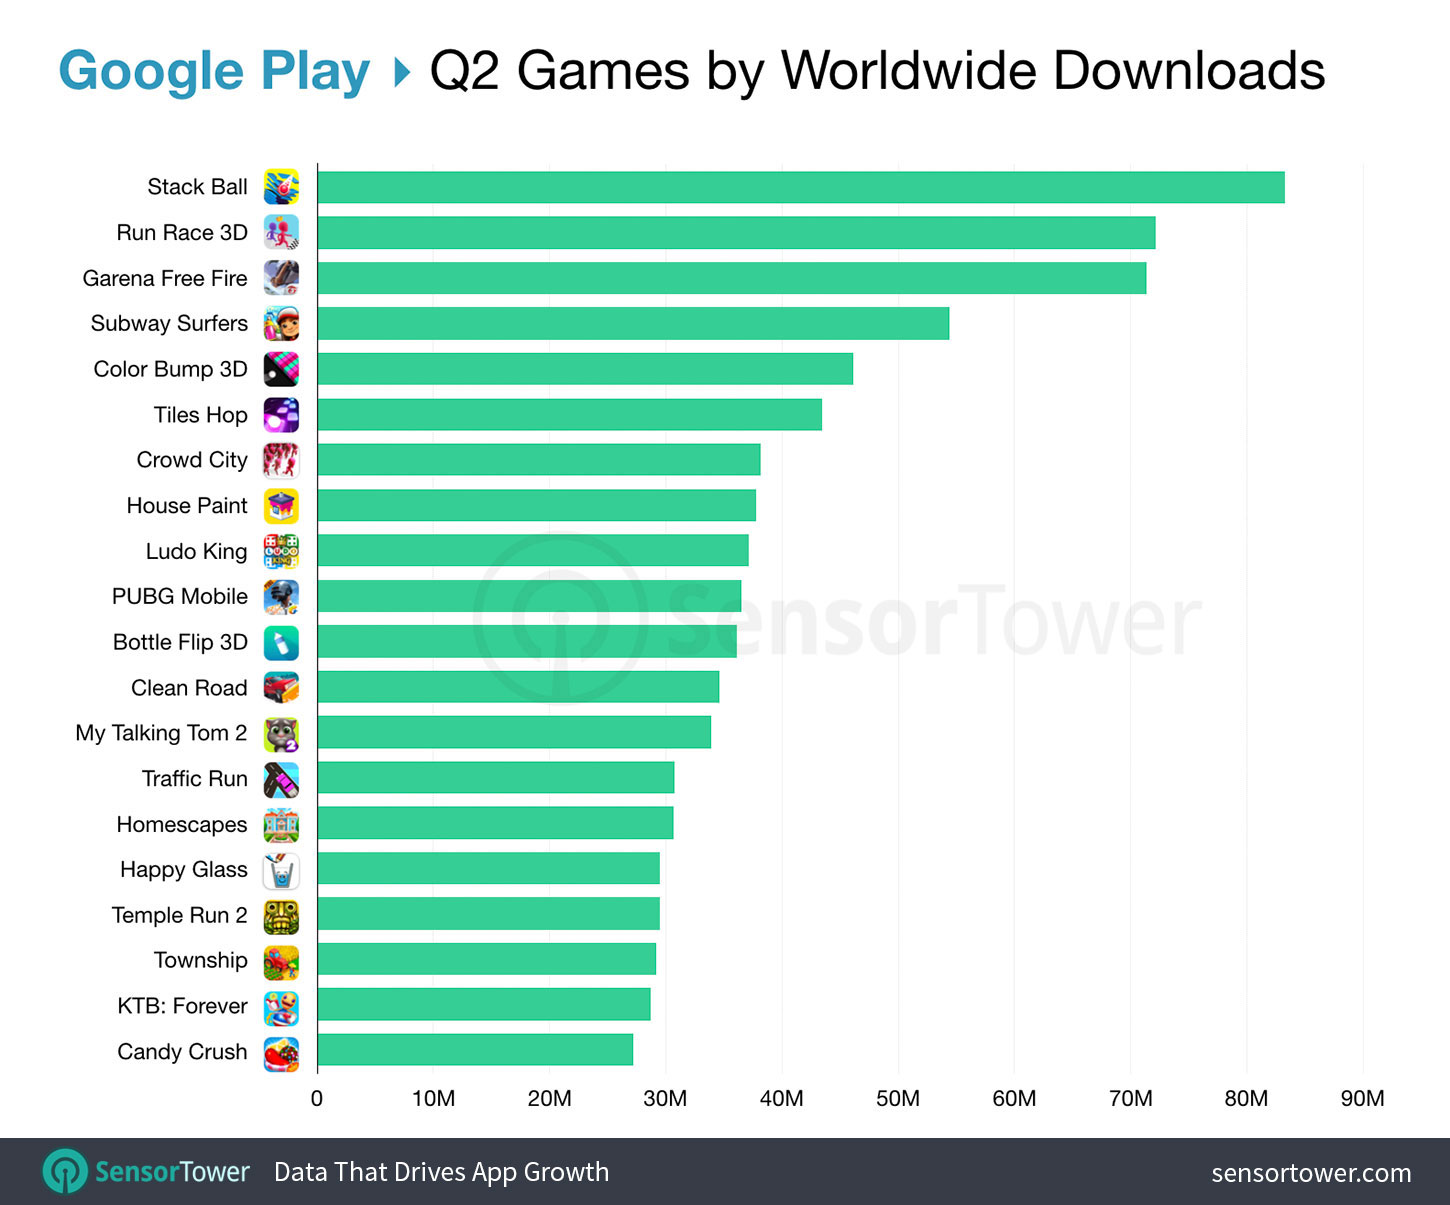 Top Google Play Games Worldwide for Q2 2019